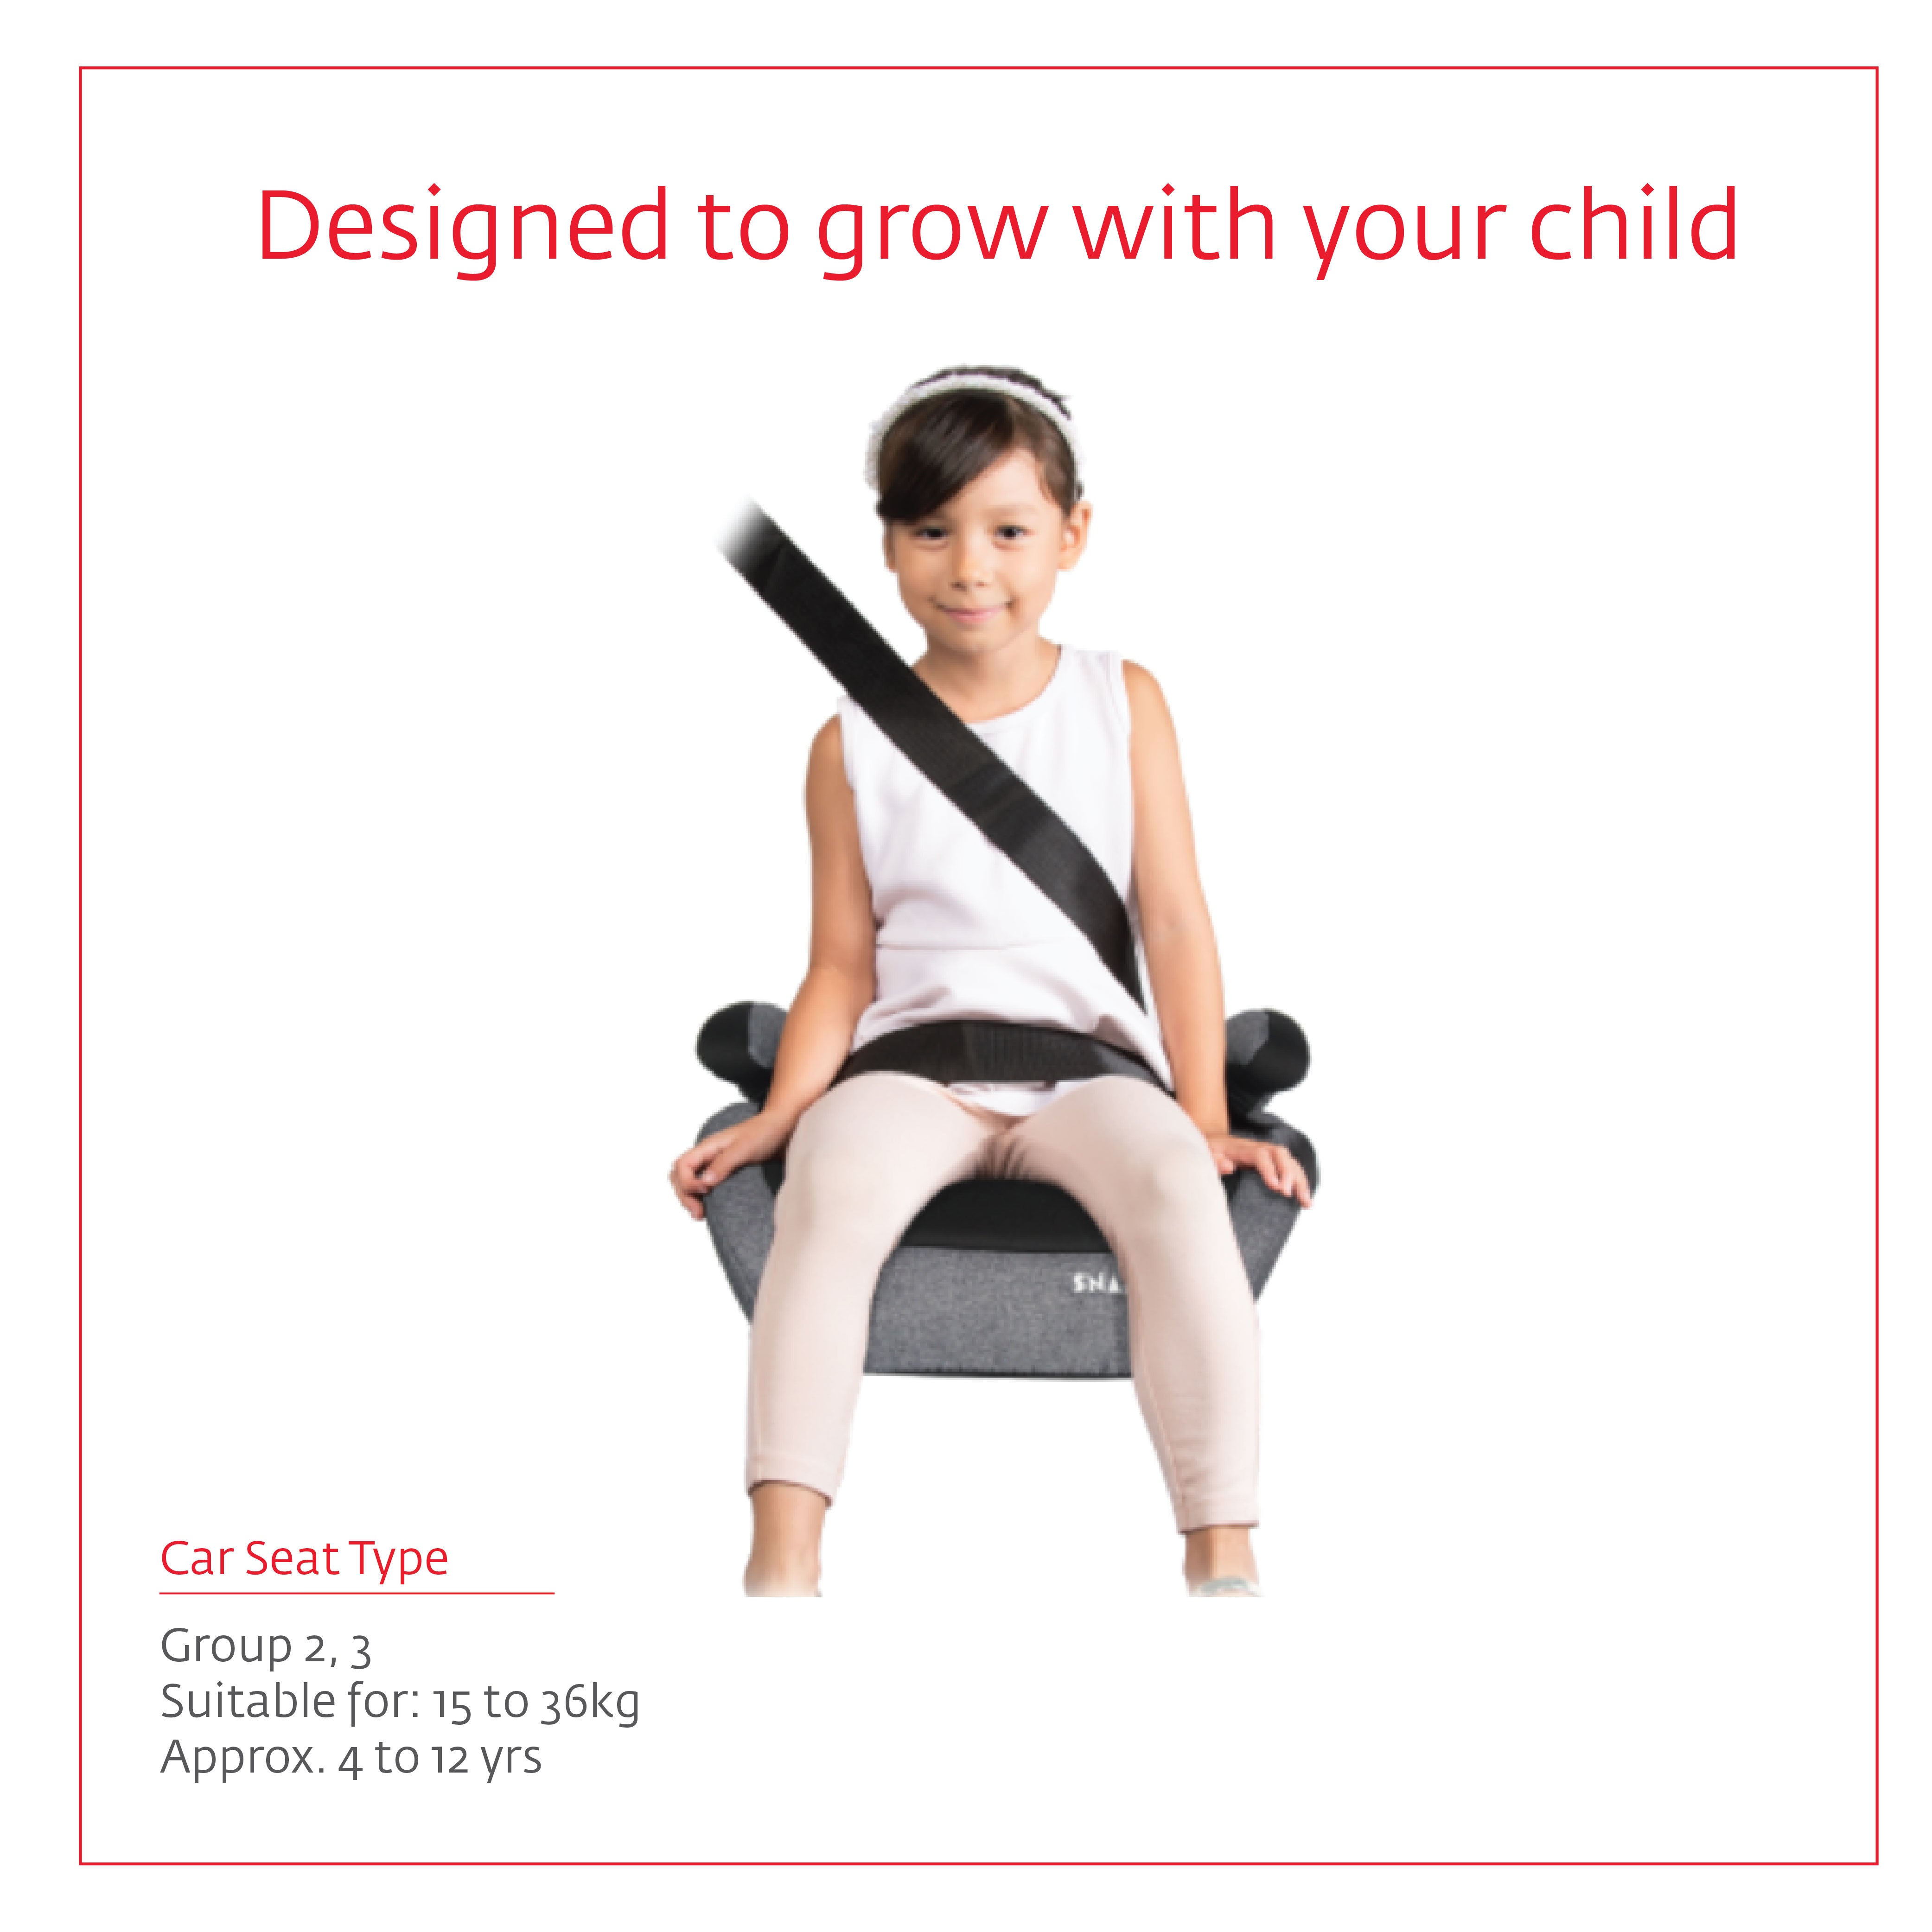 A little girl seating on Snapkis Maxi Booster car seat with the seat belt strapped on